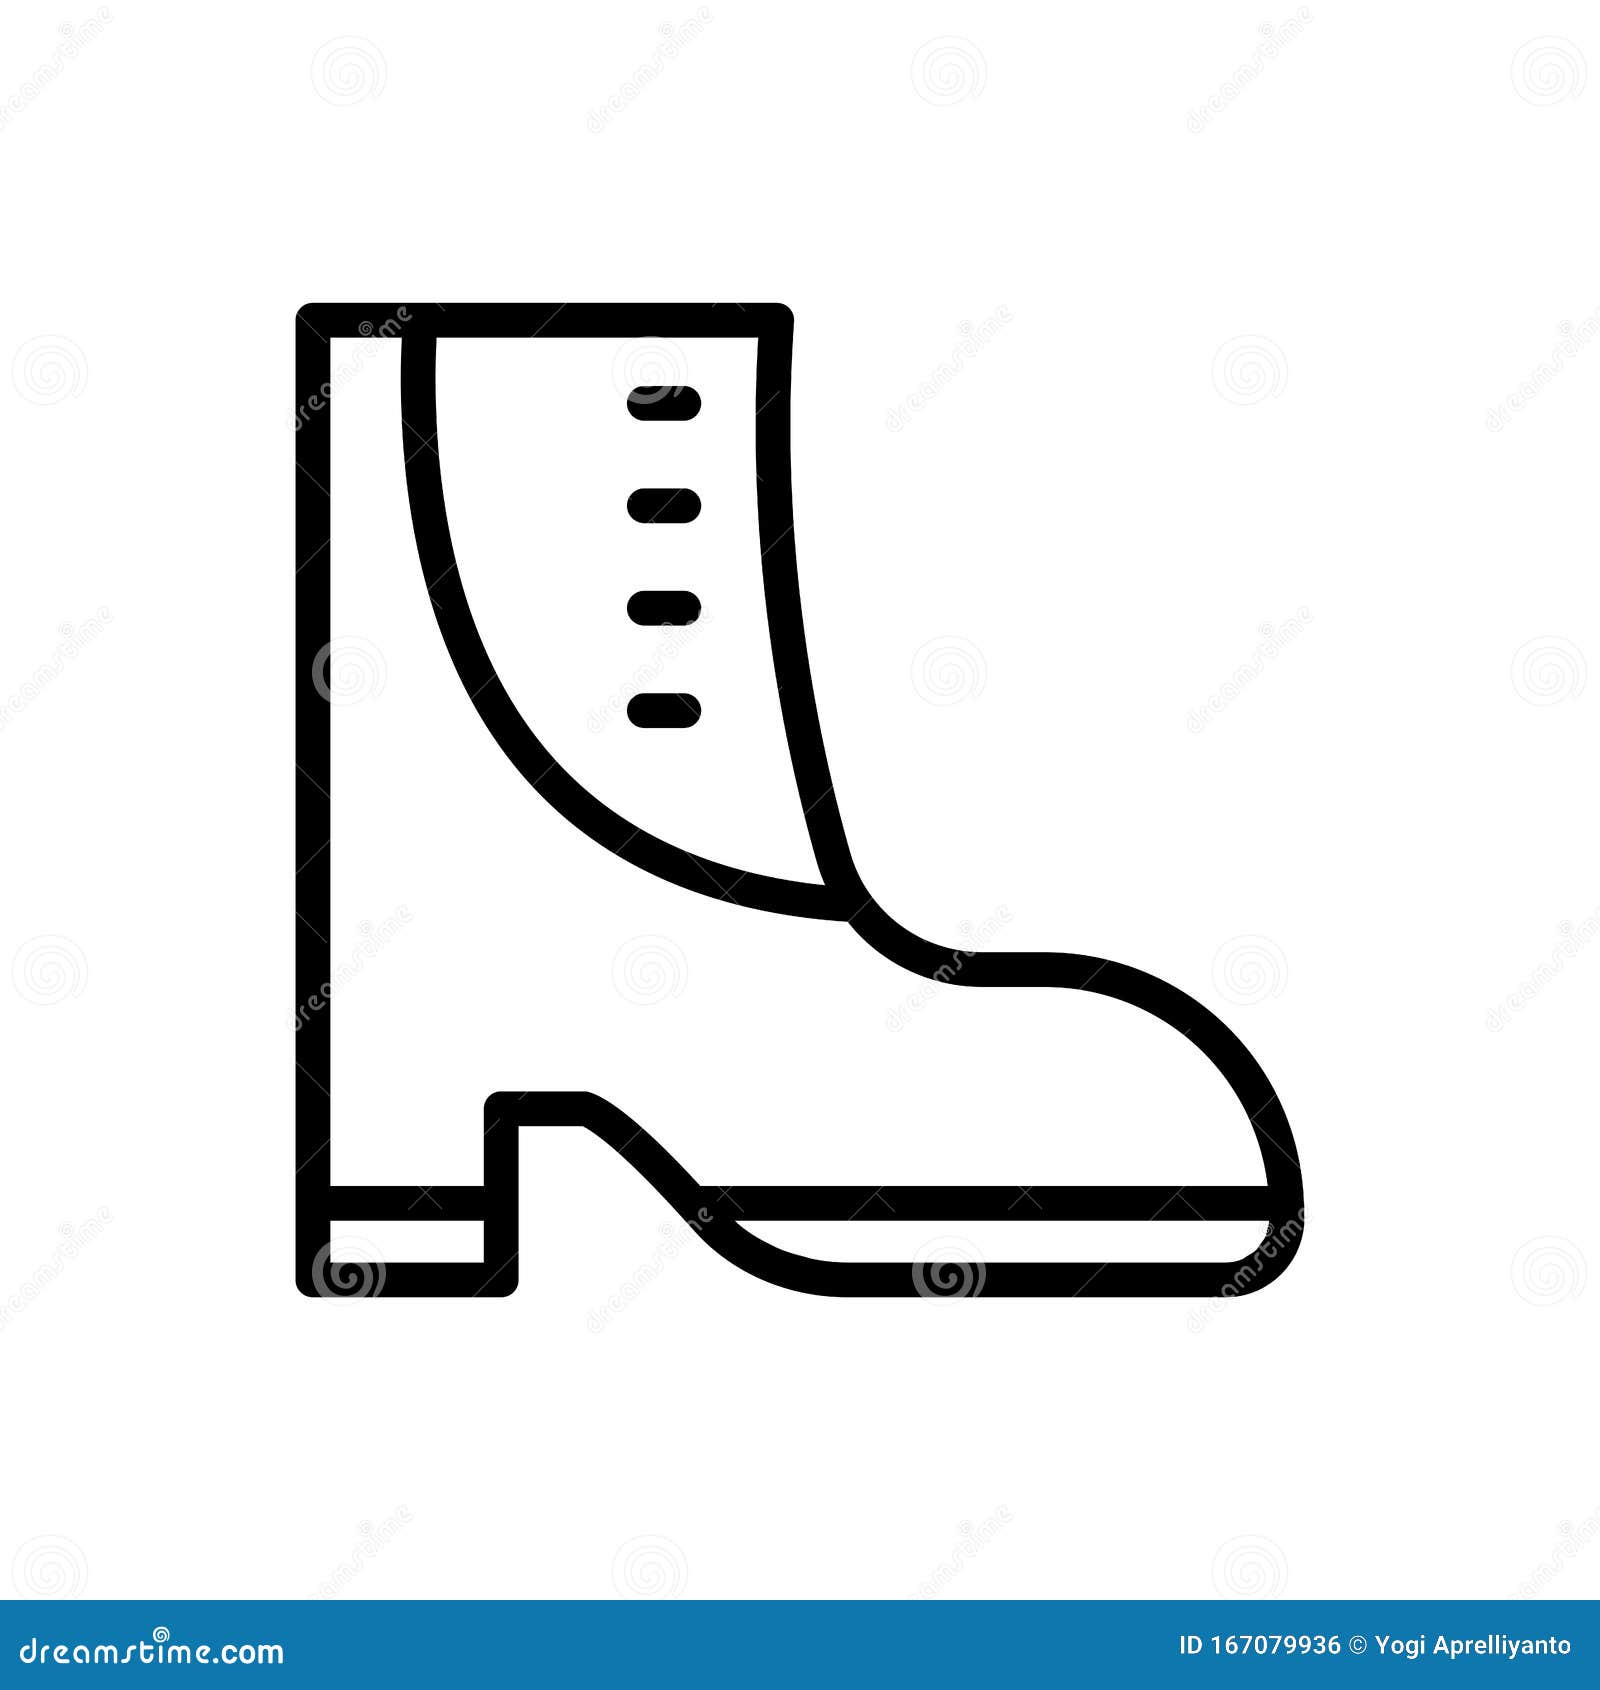 Boots outline icon. stock illustration. Illustration of shoe - 167079936